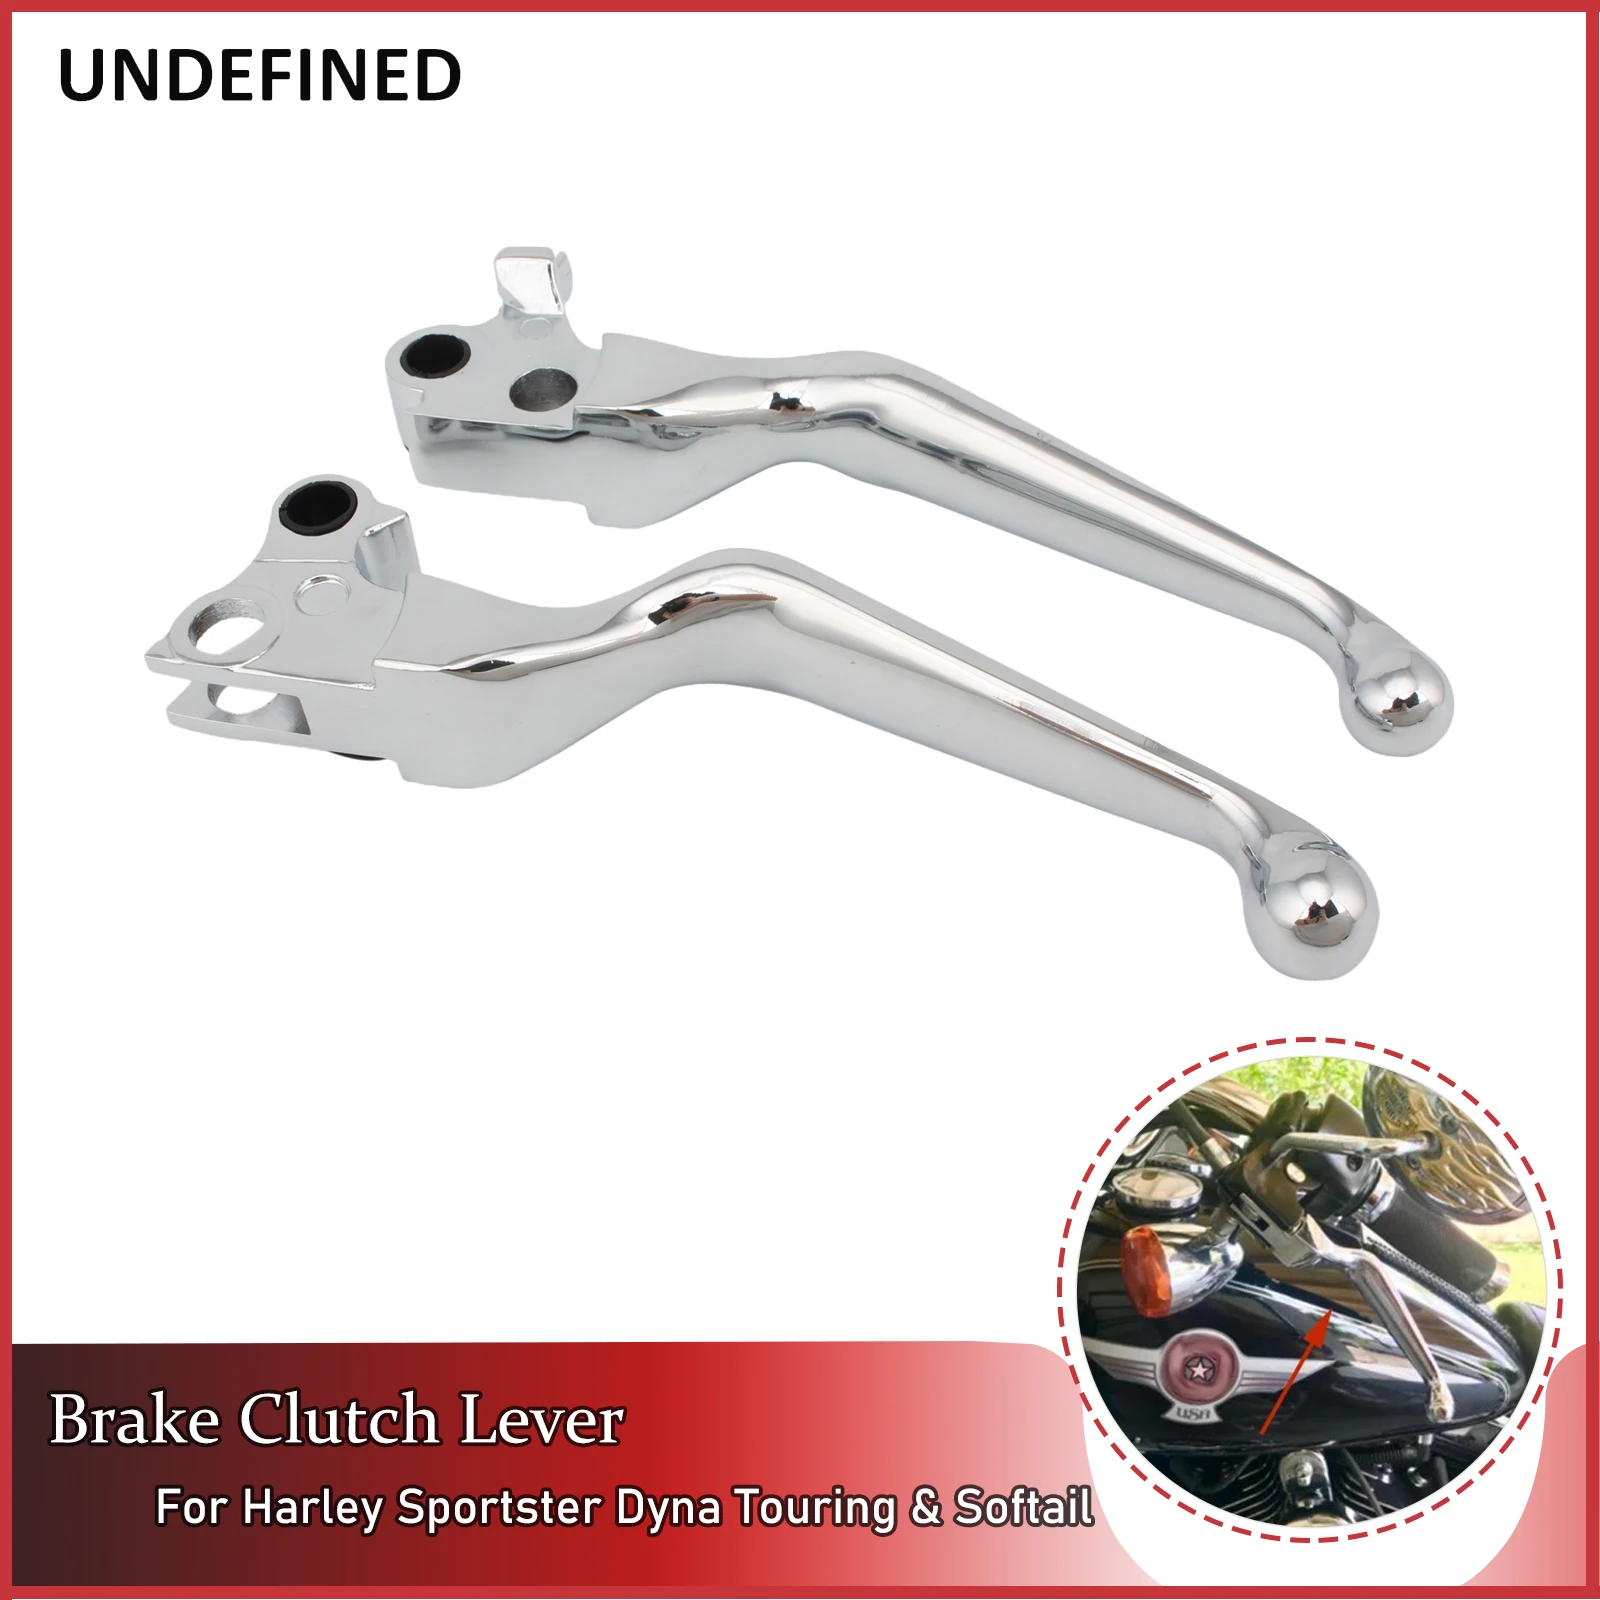 Motorcycle Brake Clutch Lever Cable Shifter Levers Chrome For Harley Sportster XL 883 Dyna FXD Touring Road King Softail Fat Boy